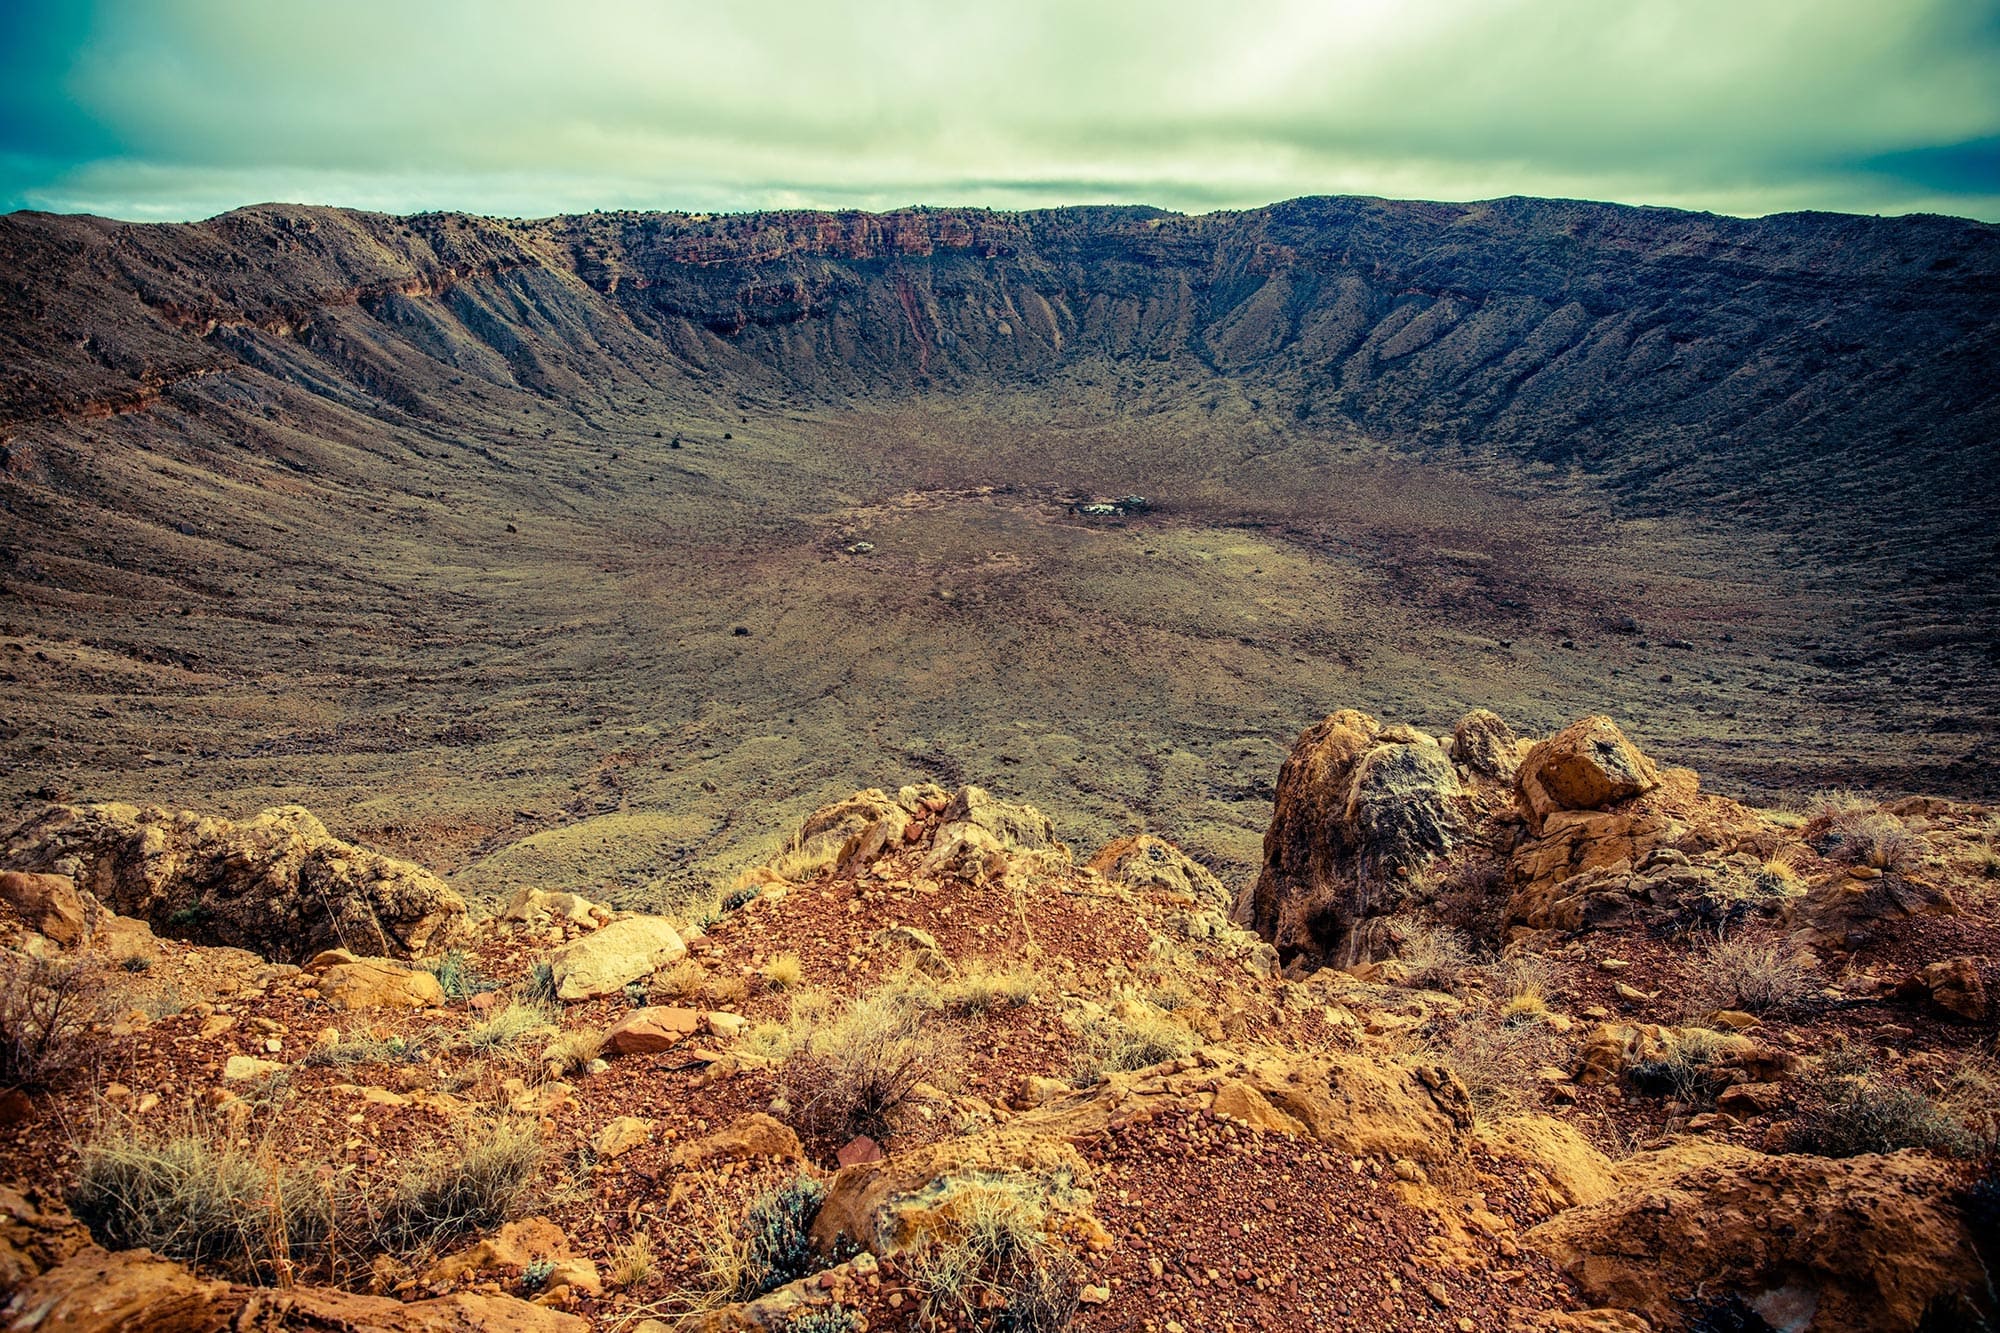 The oldest impact crater on Earth was created 2.2 billion years ago, marking the end of the global ice age.